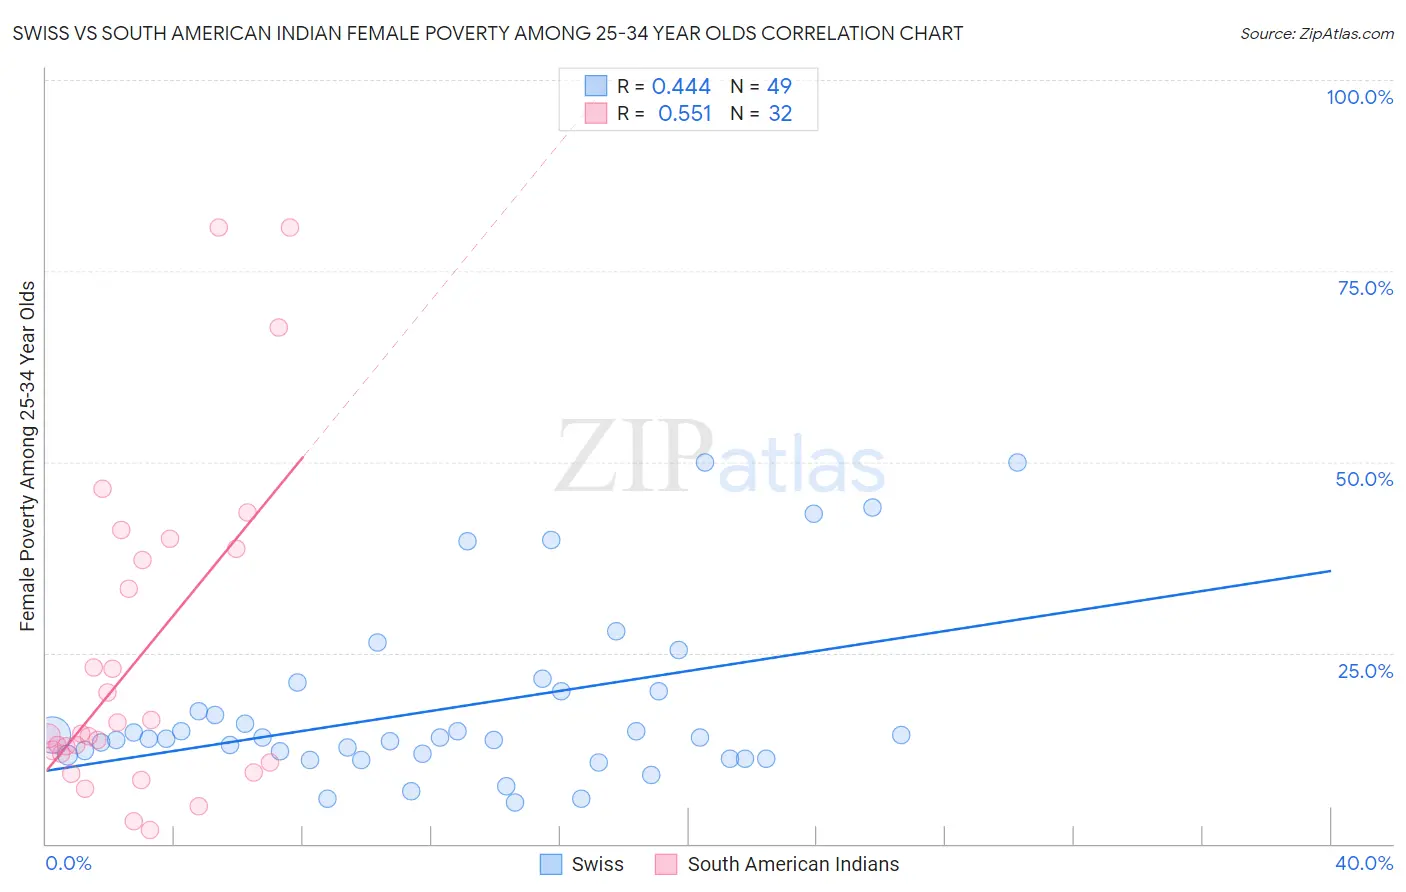 Swiss vs South American Indian Female Poverty Among 25-34 Year Olds